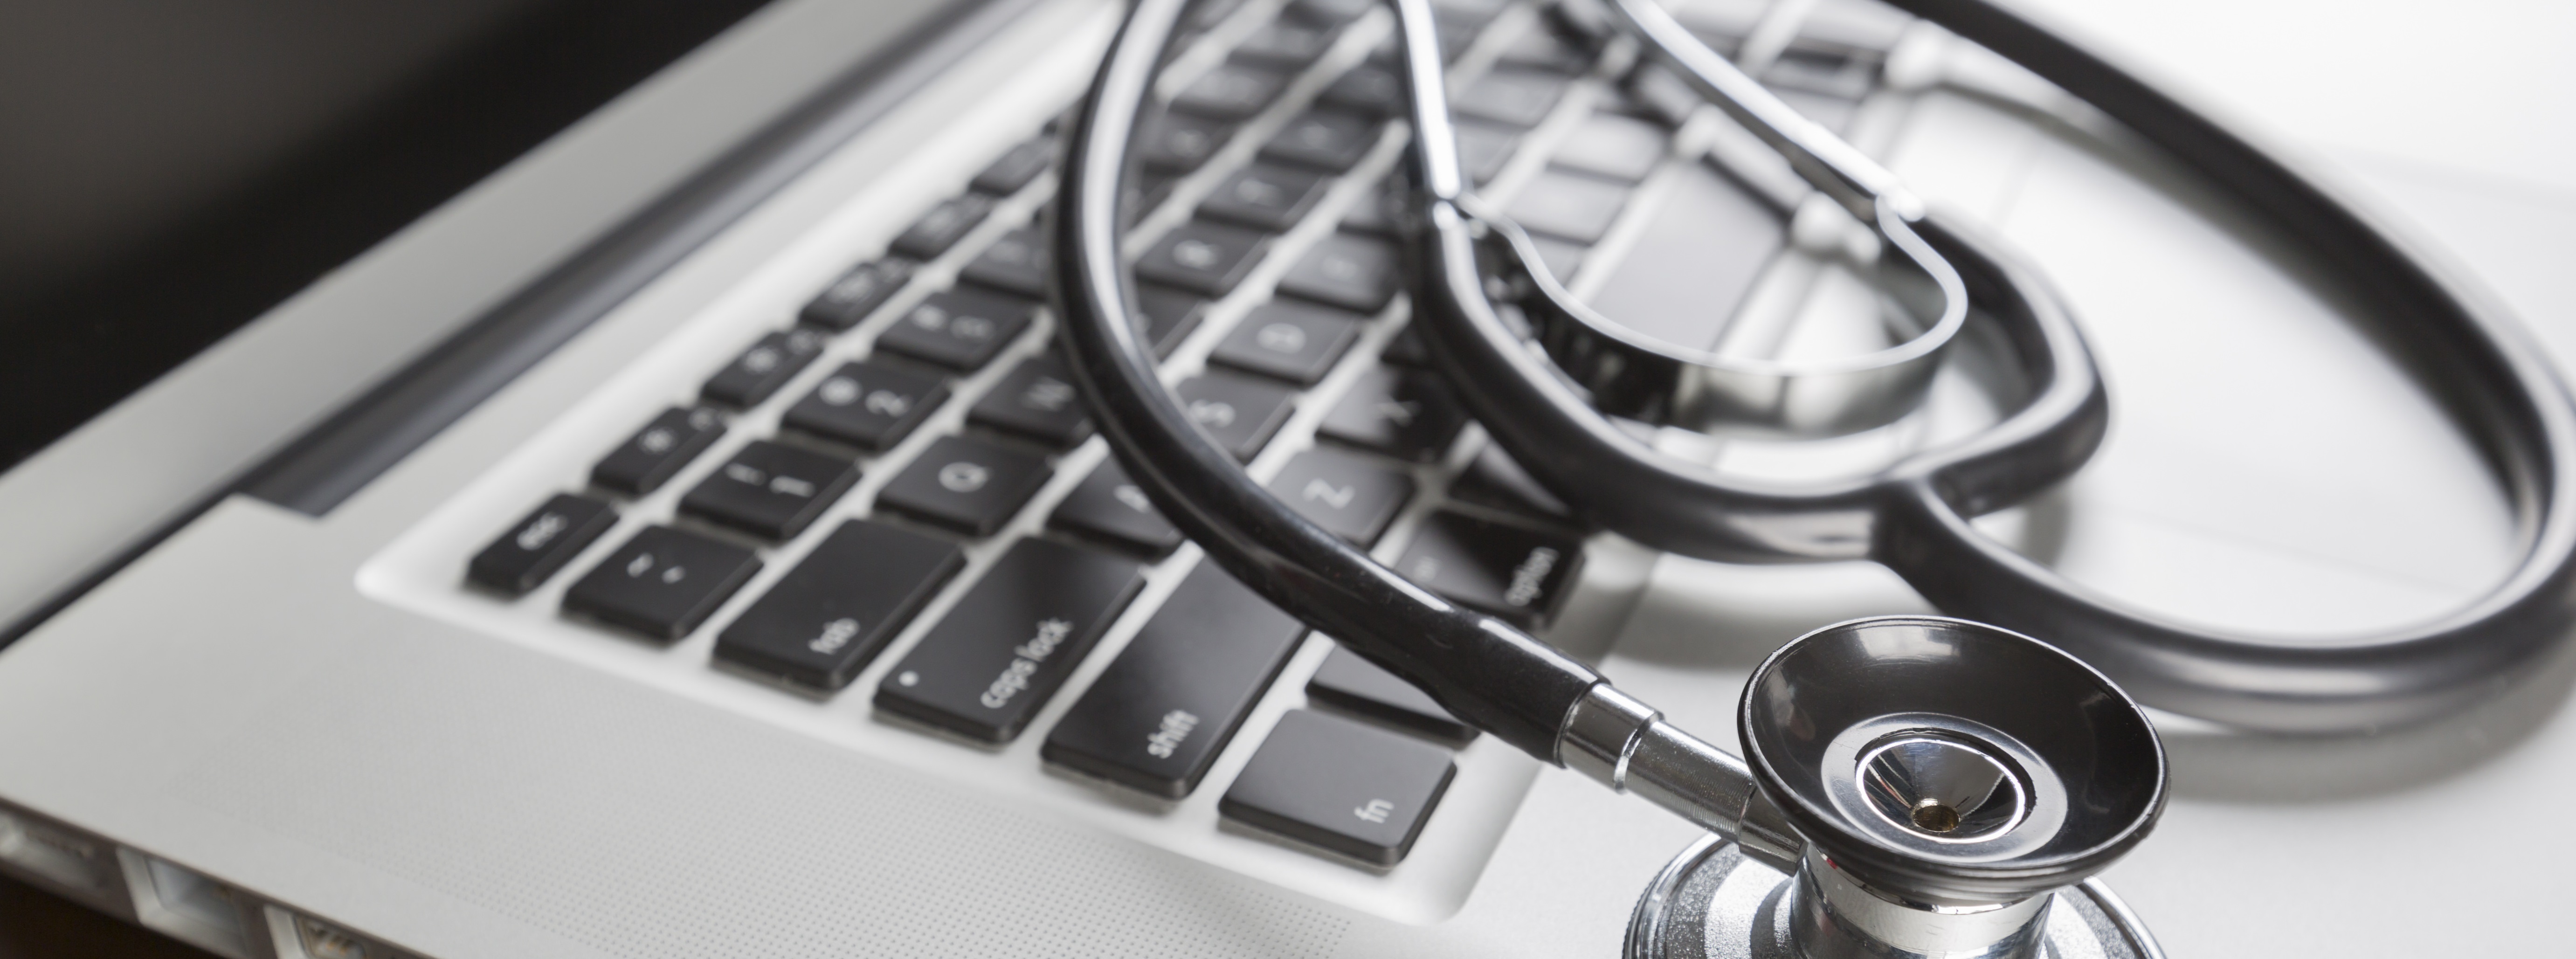 Physician Burnout: Are Electronic Medical Records the Culprit? 